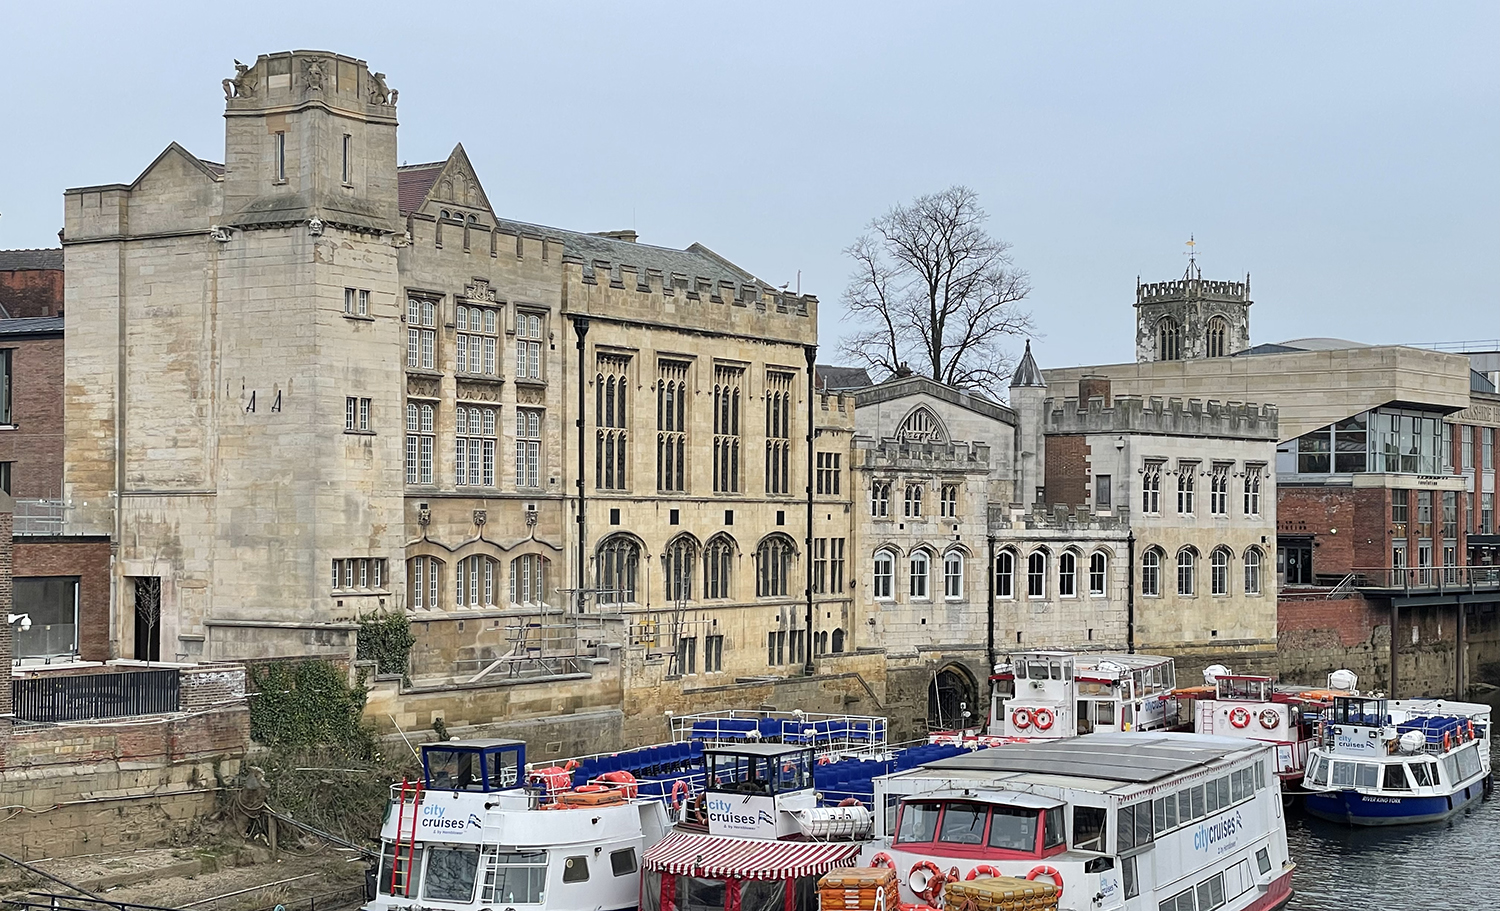 York Guildhall with boats moored in front